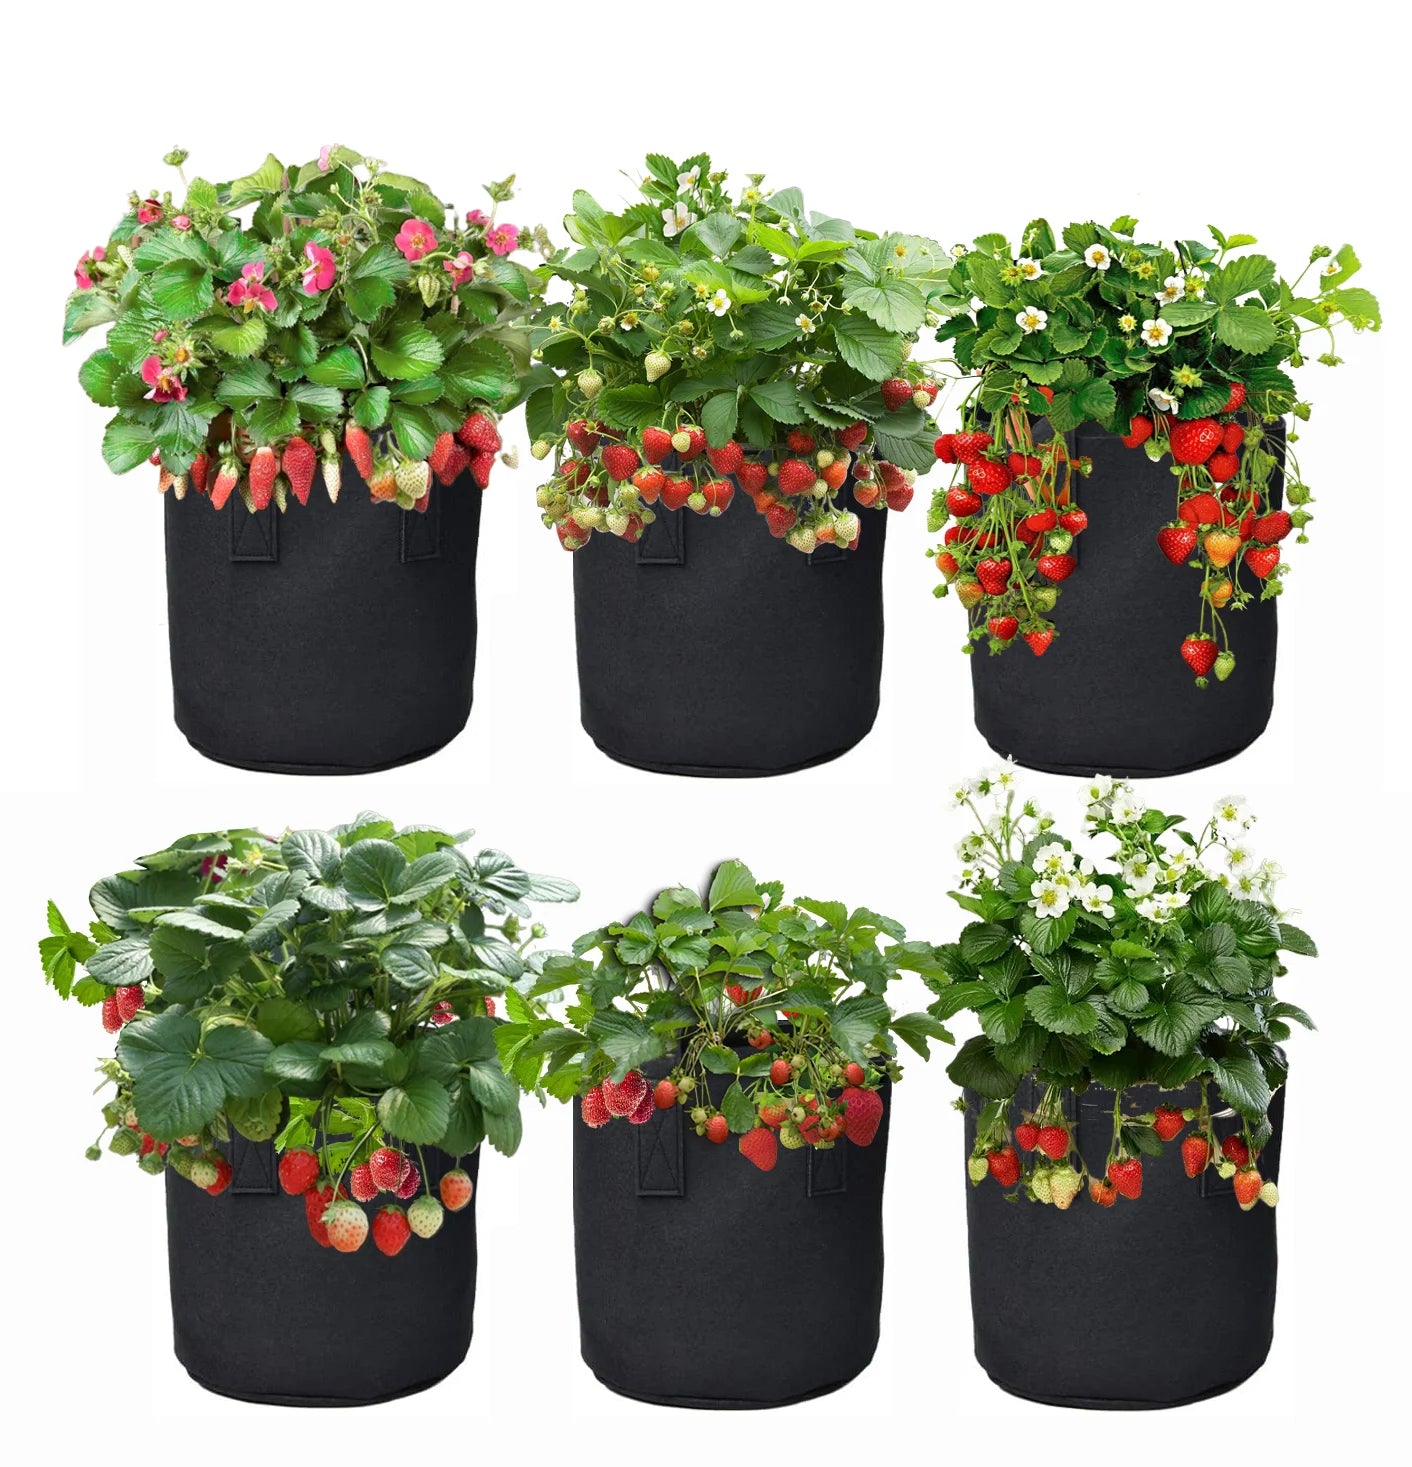 Magic Fabric Grow Bags - 7 Gallon-   Make Gardening Fast and Easy- $12.00 -  Buy 1 Get 1 Free ****